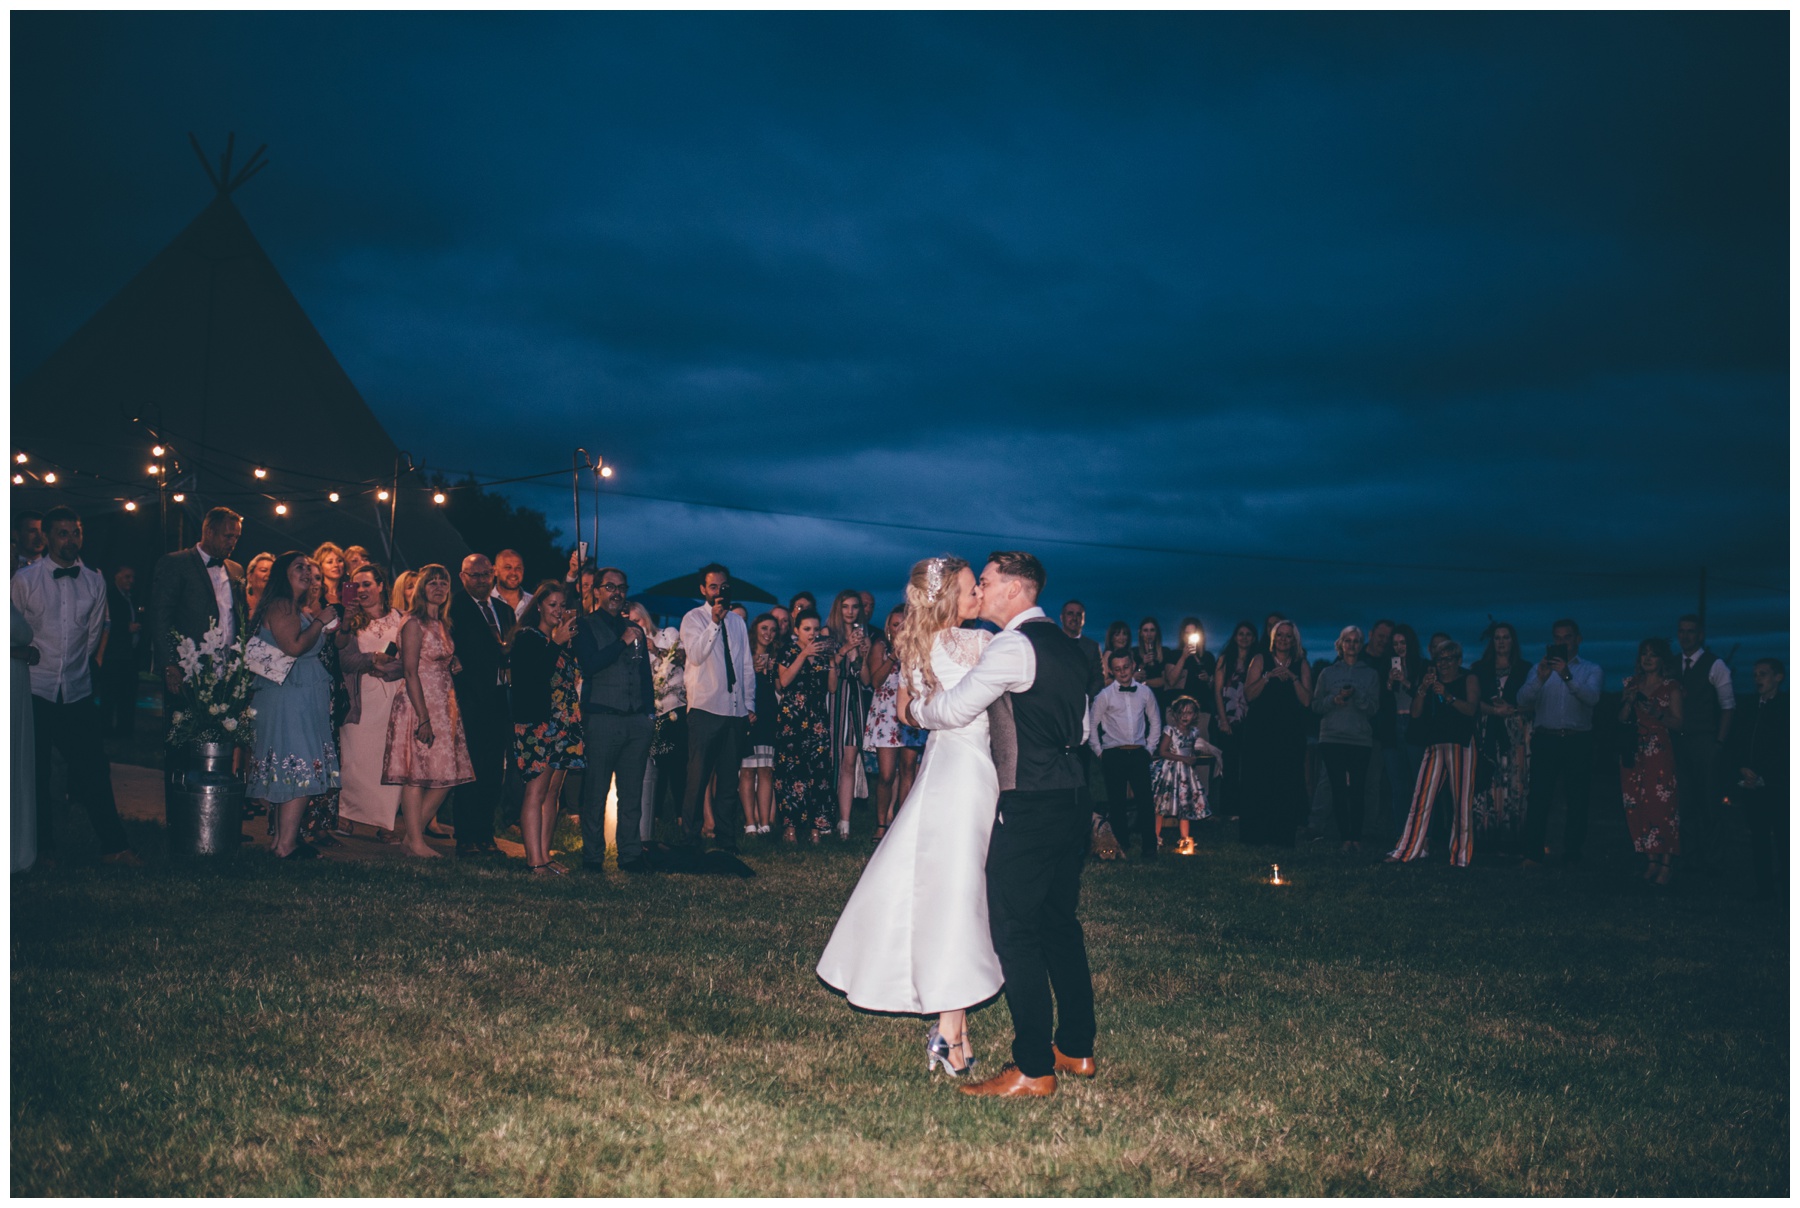 The most gorgeous moonlit First Dance at tipi wedding in Staffordshire.